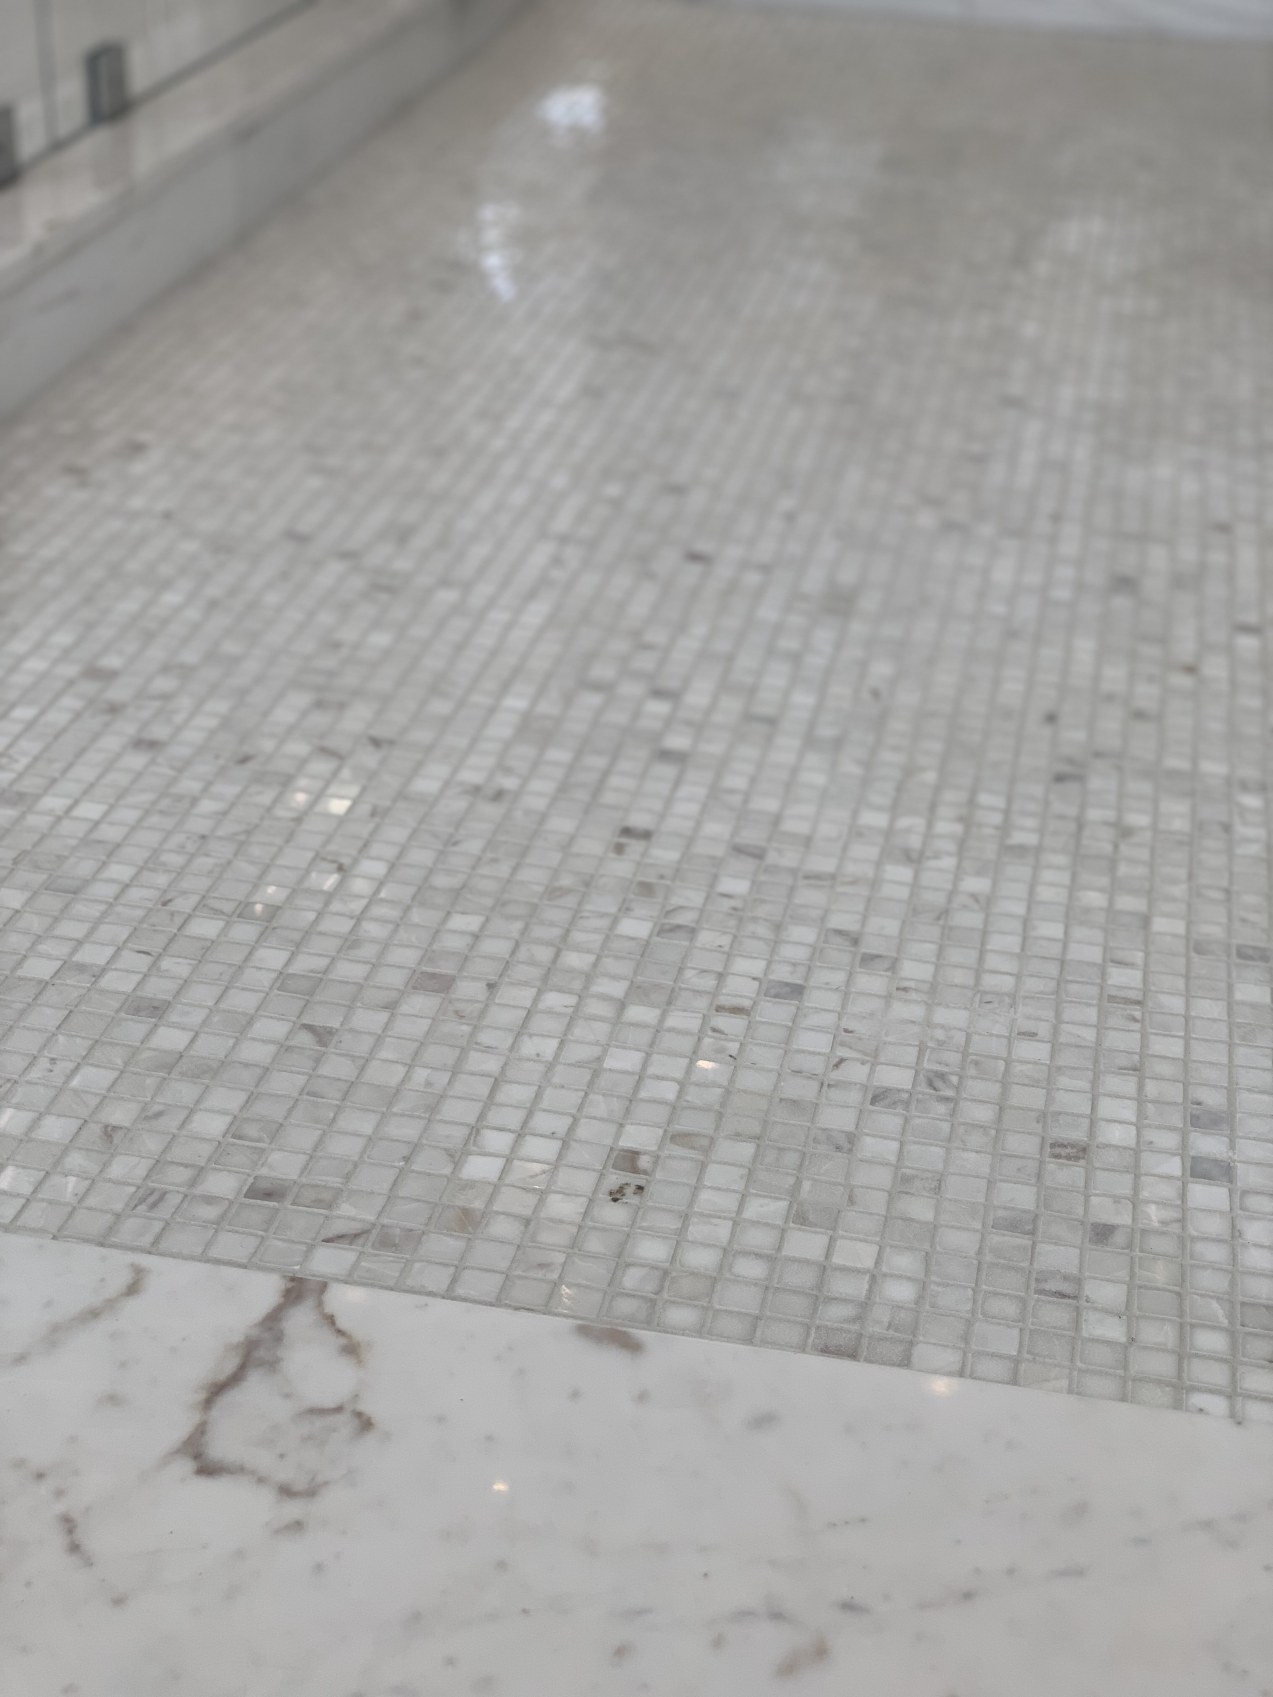 After photo of walk-in shower mosaic floor tile